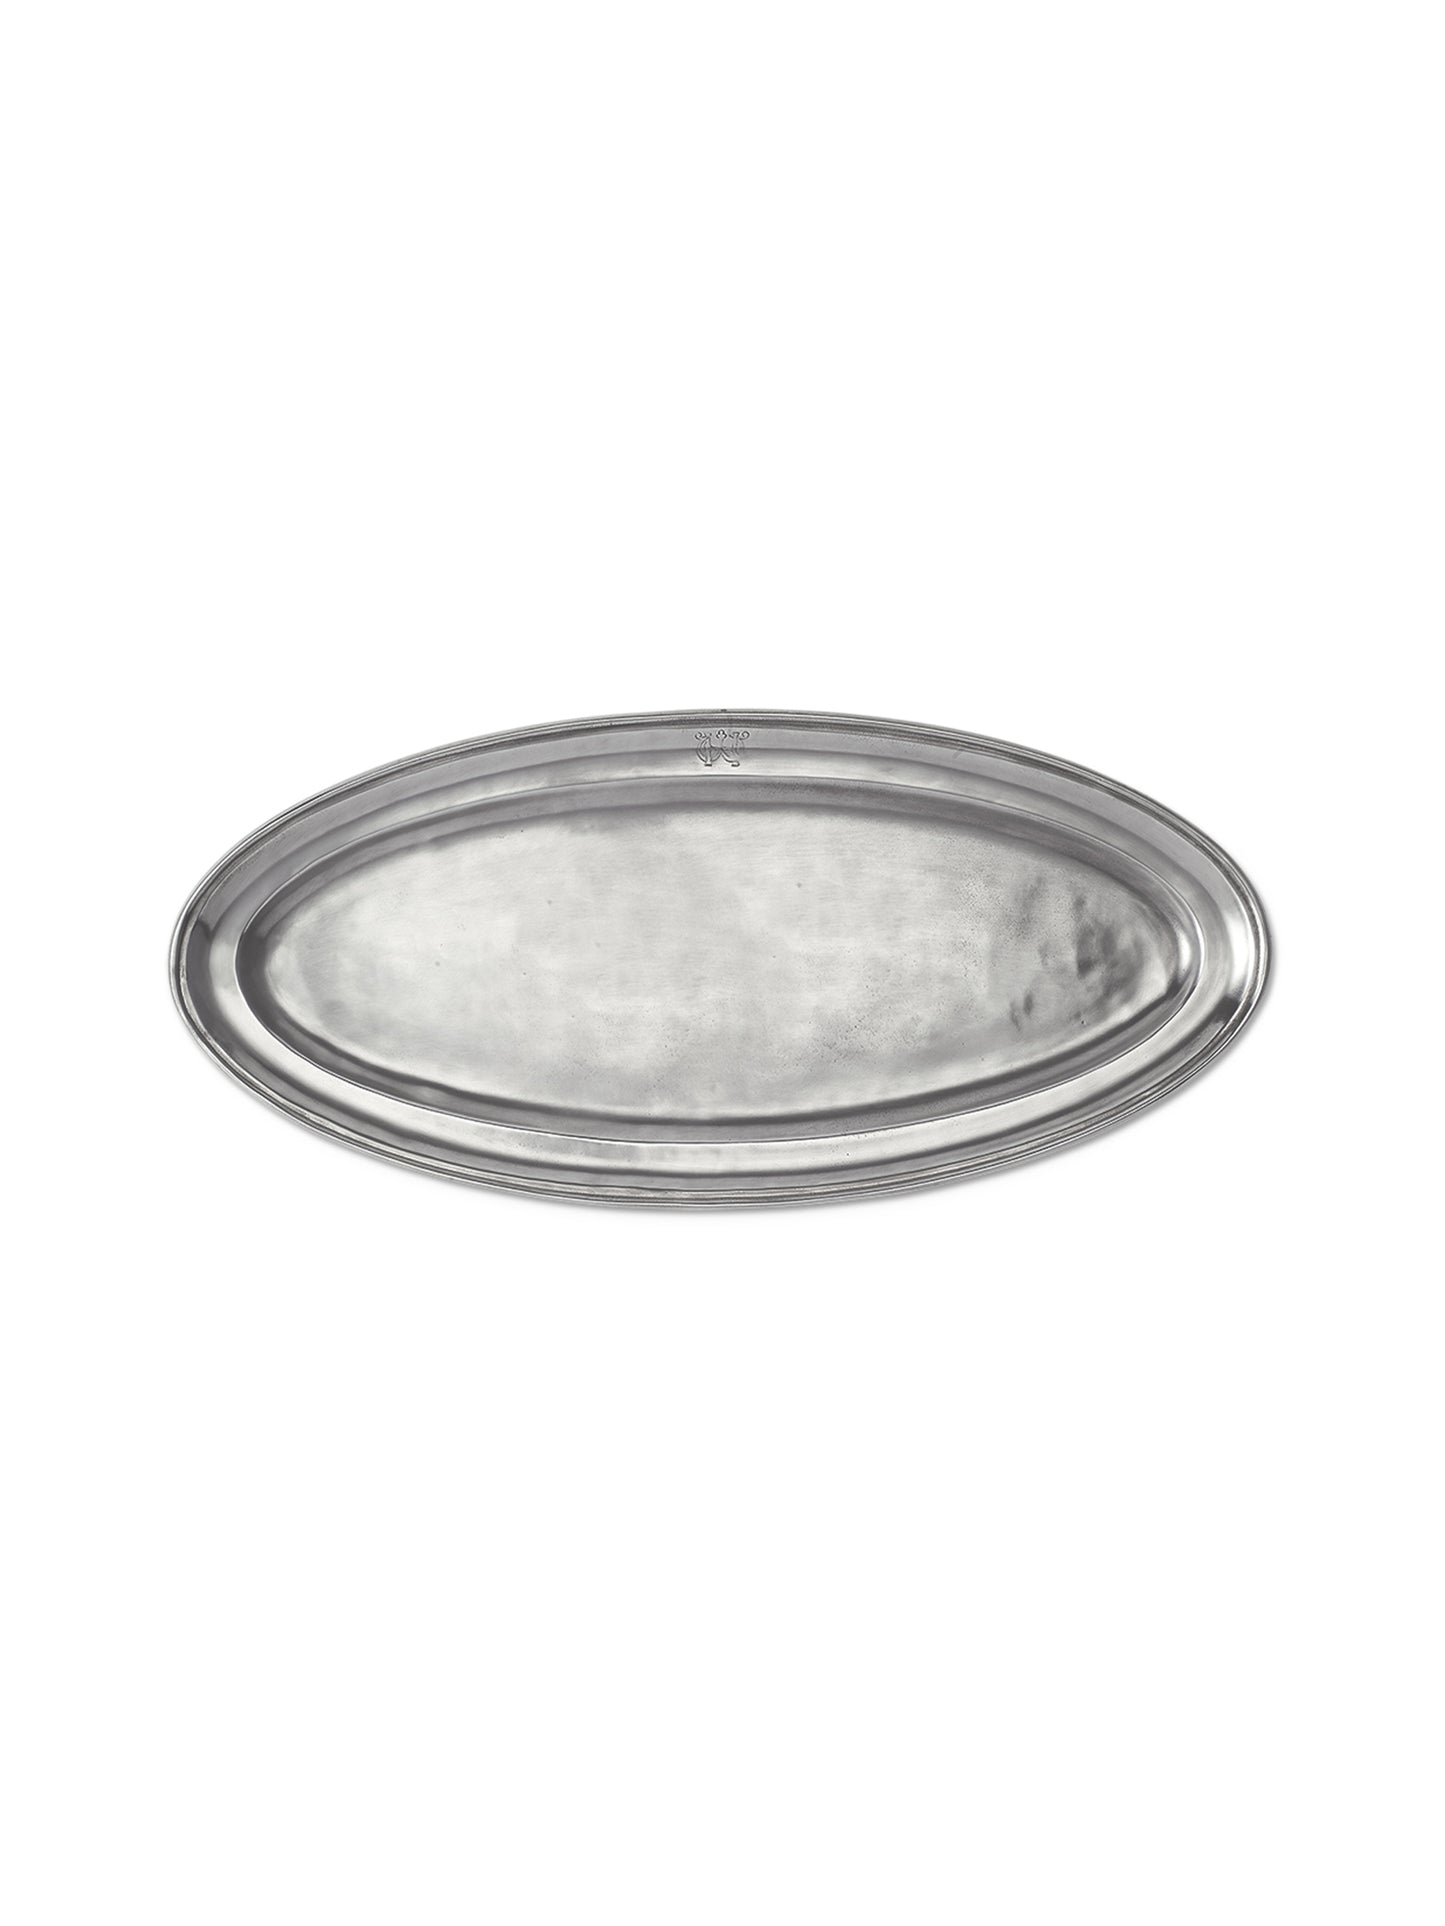 MATCH Pewter Oval Fish Platter Lungo Weston Table